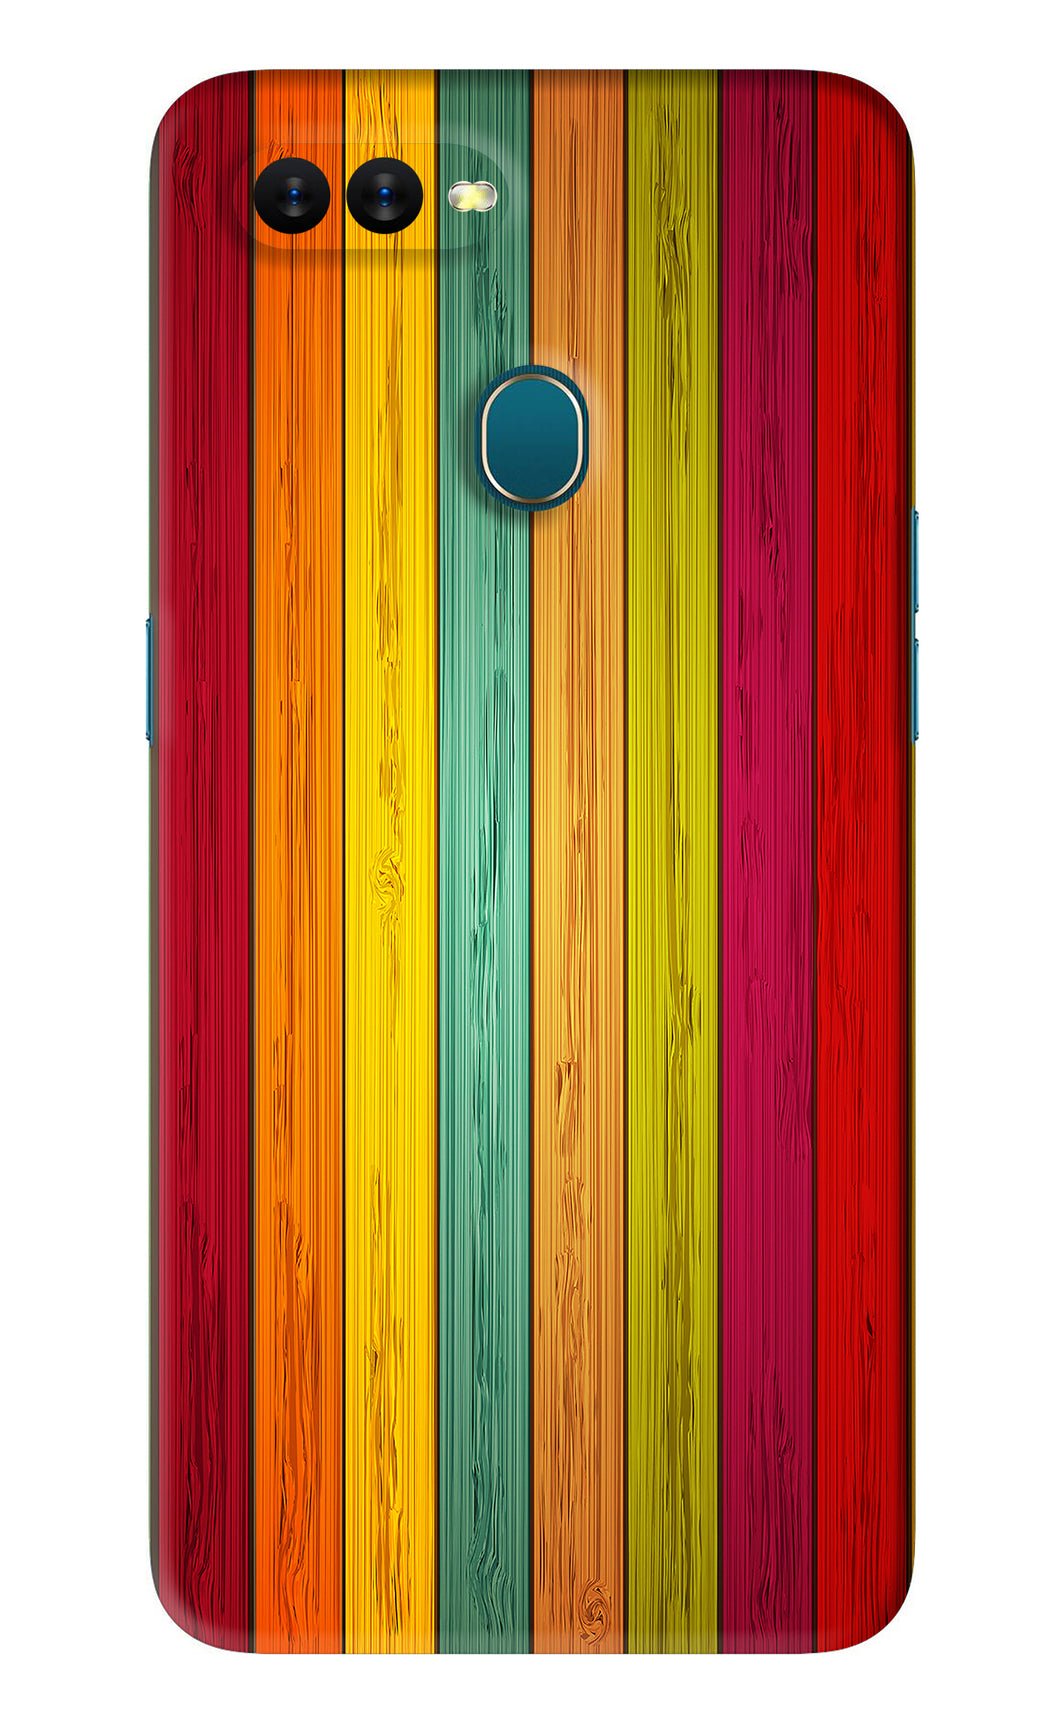 Multicolor Wooden Oppo A5S Back Skin Wrap